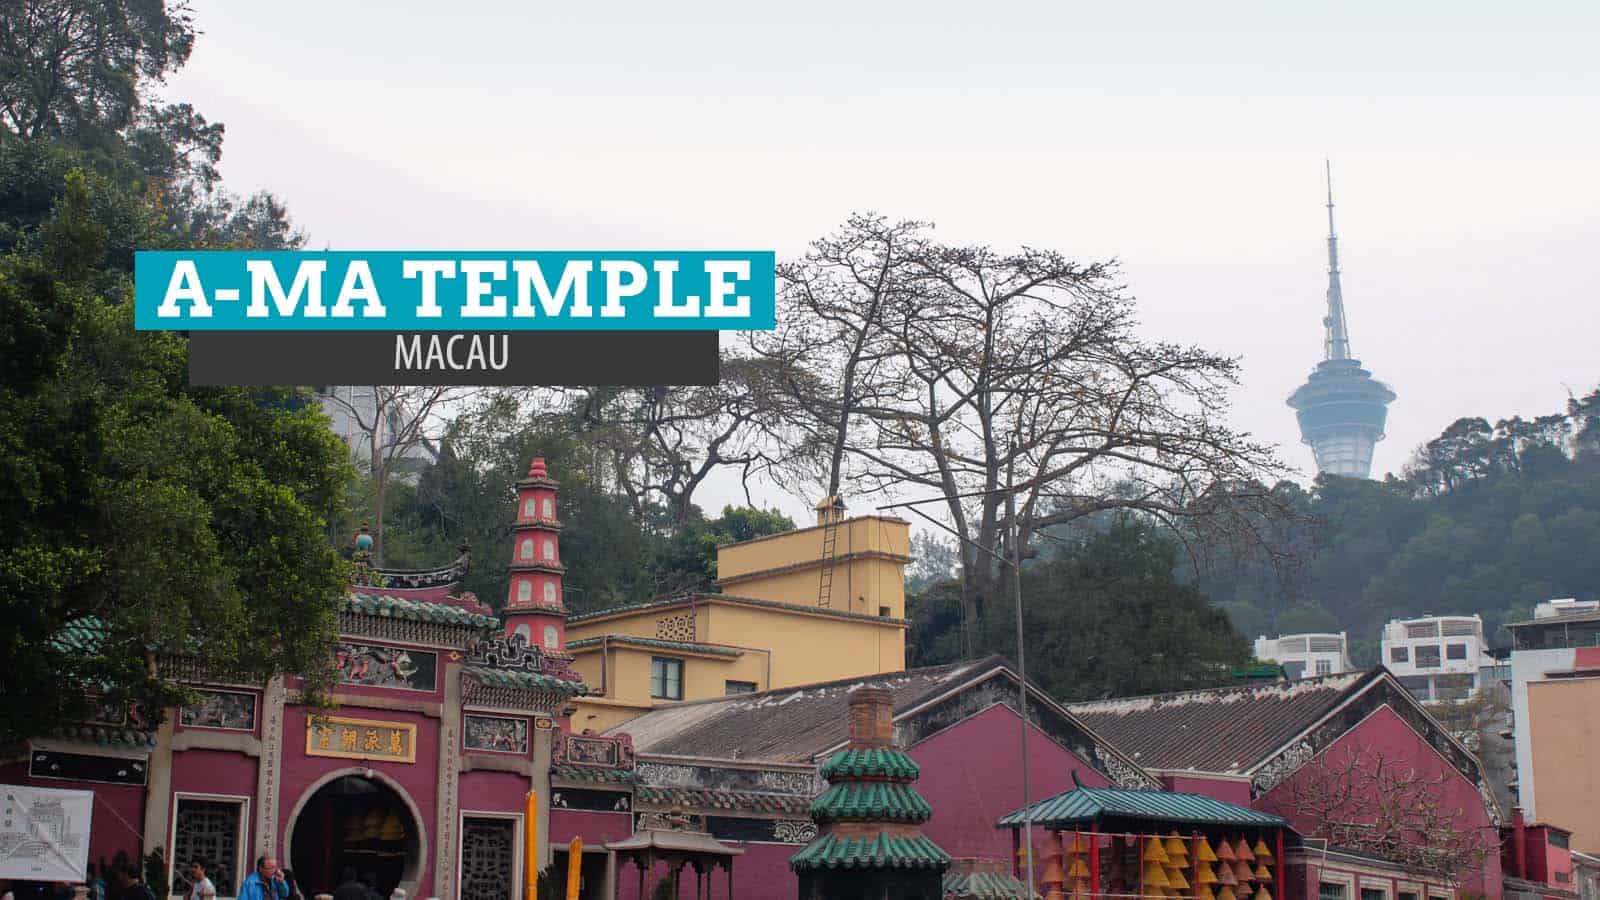 A-MA TEMPLE: Tracing the Roots of Macau